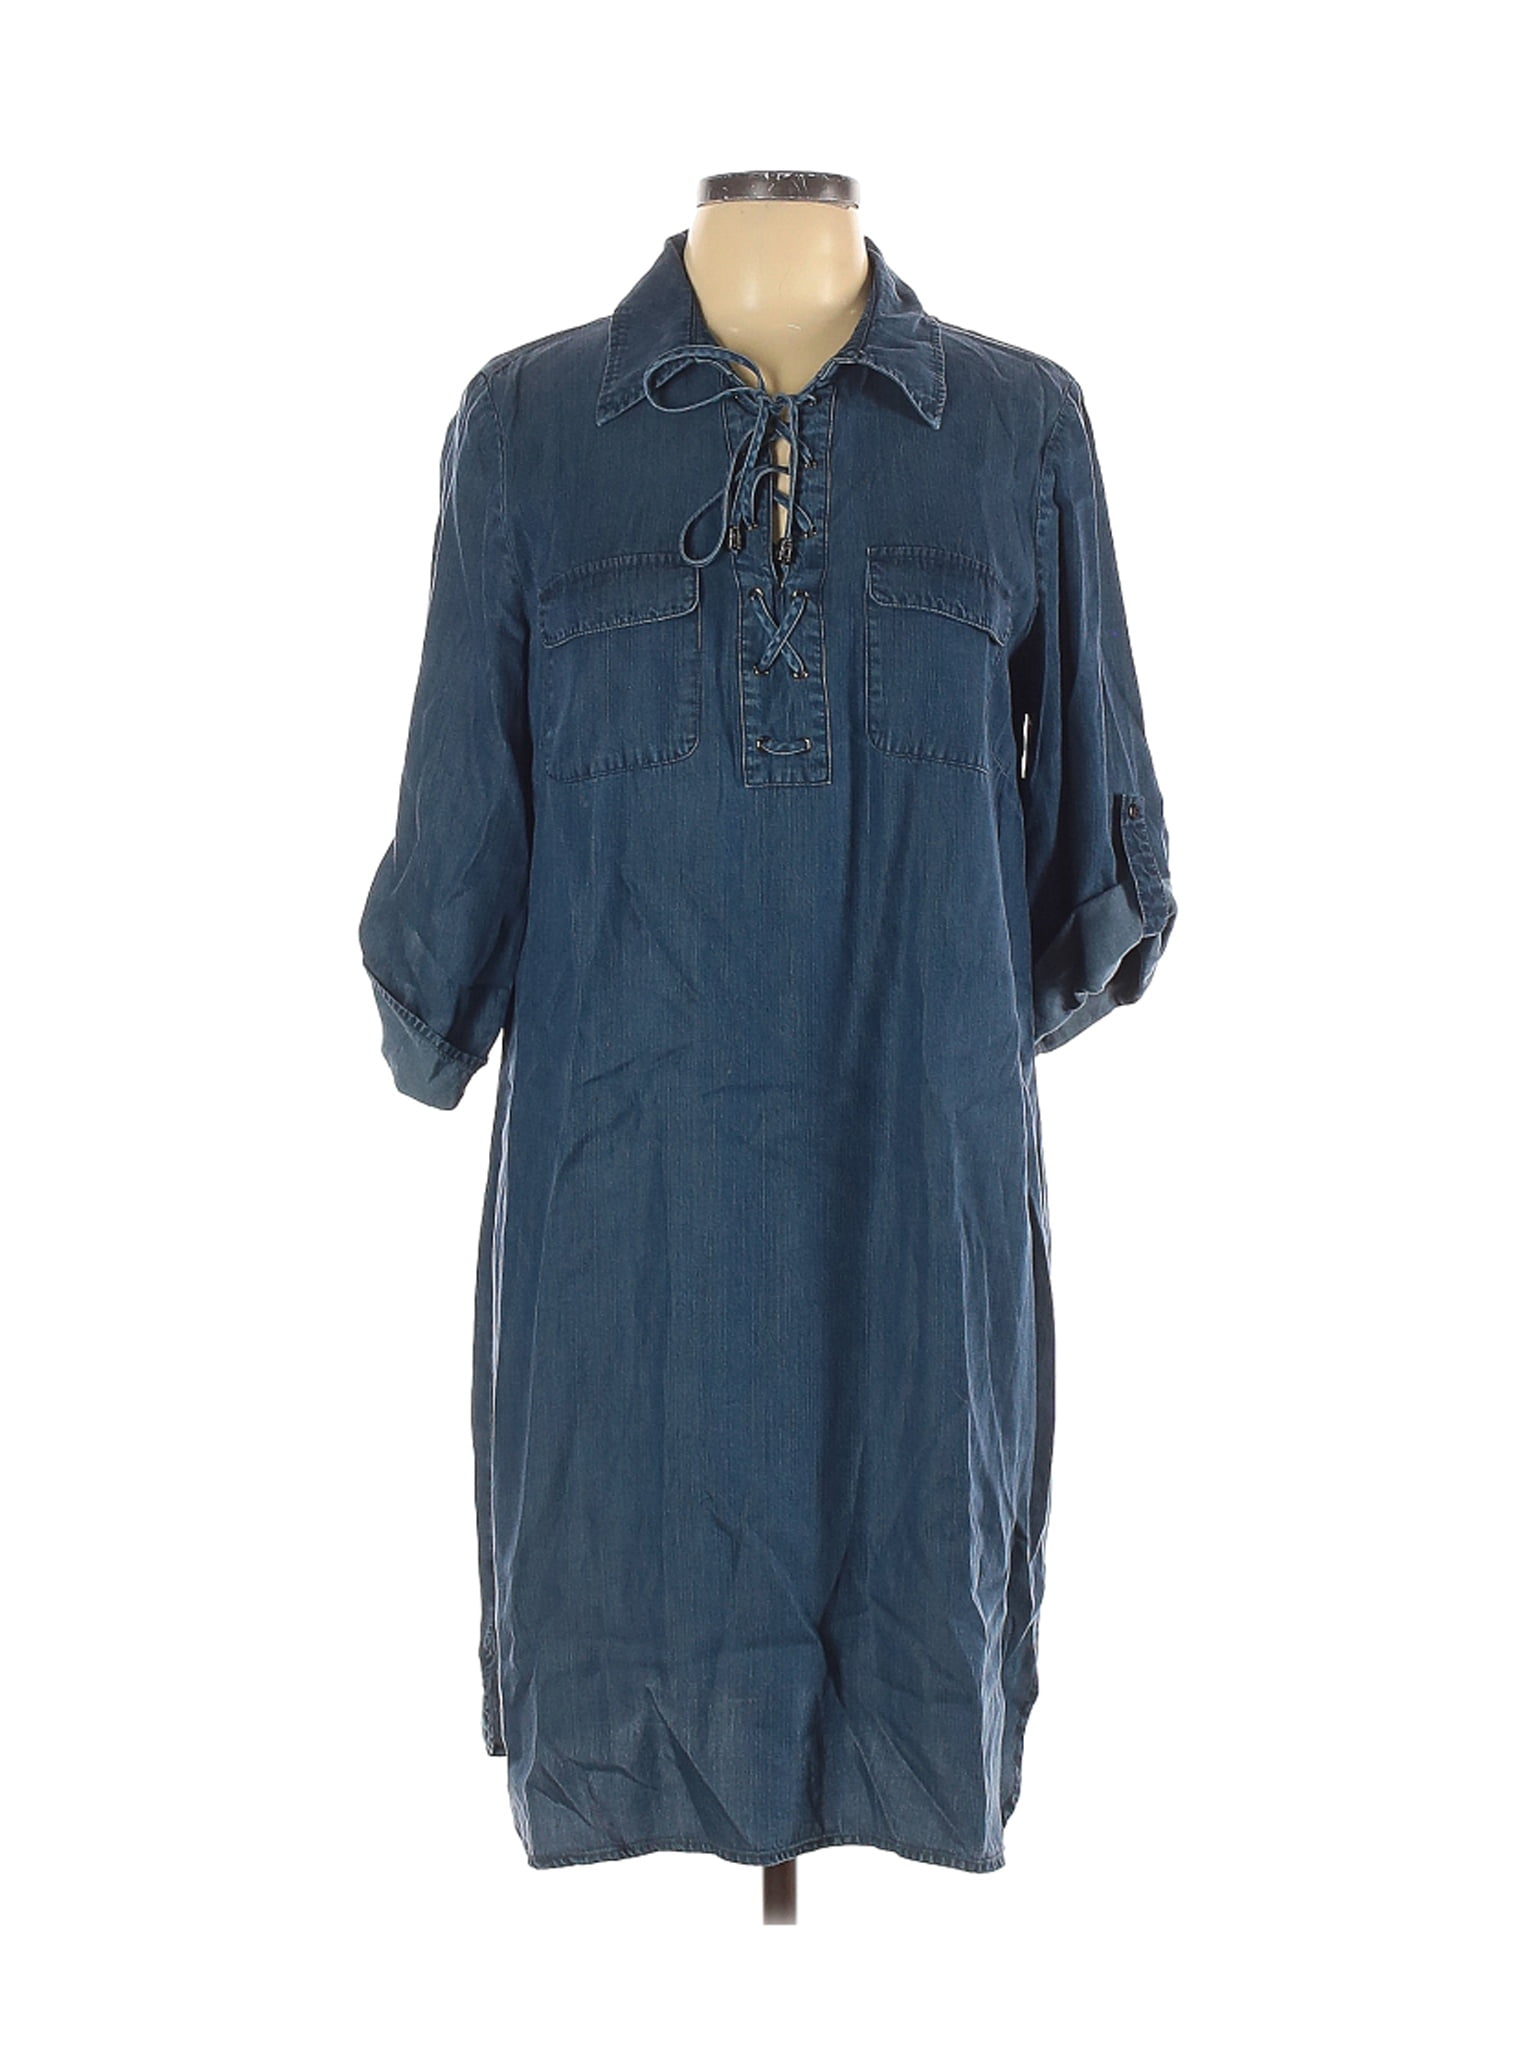 Neiman Marcus - Pre-Owned Neiman Marcus Women's Size 12 Casual Dress ...